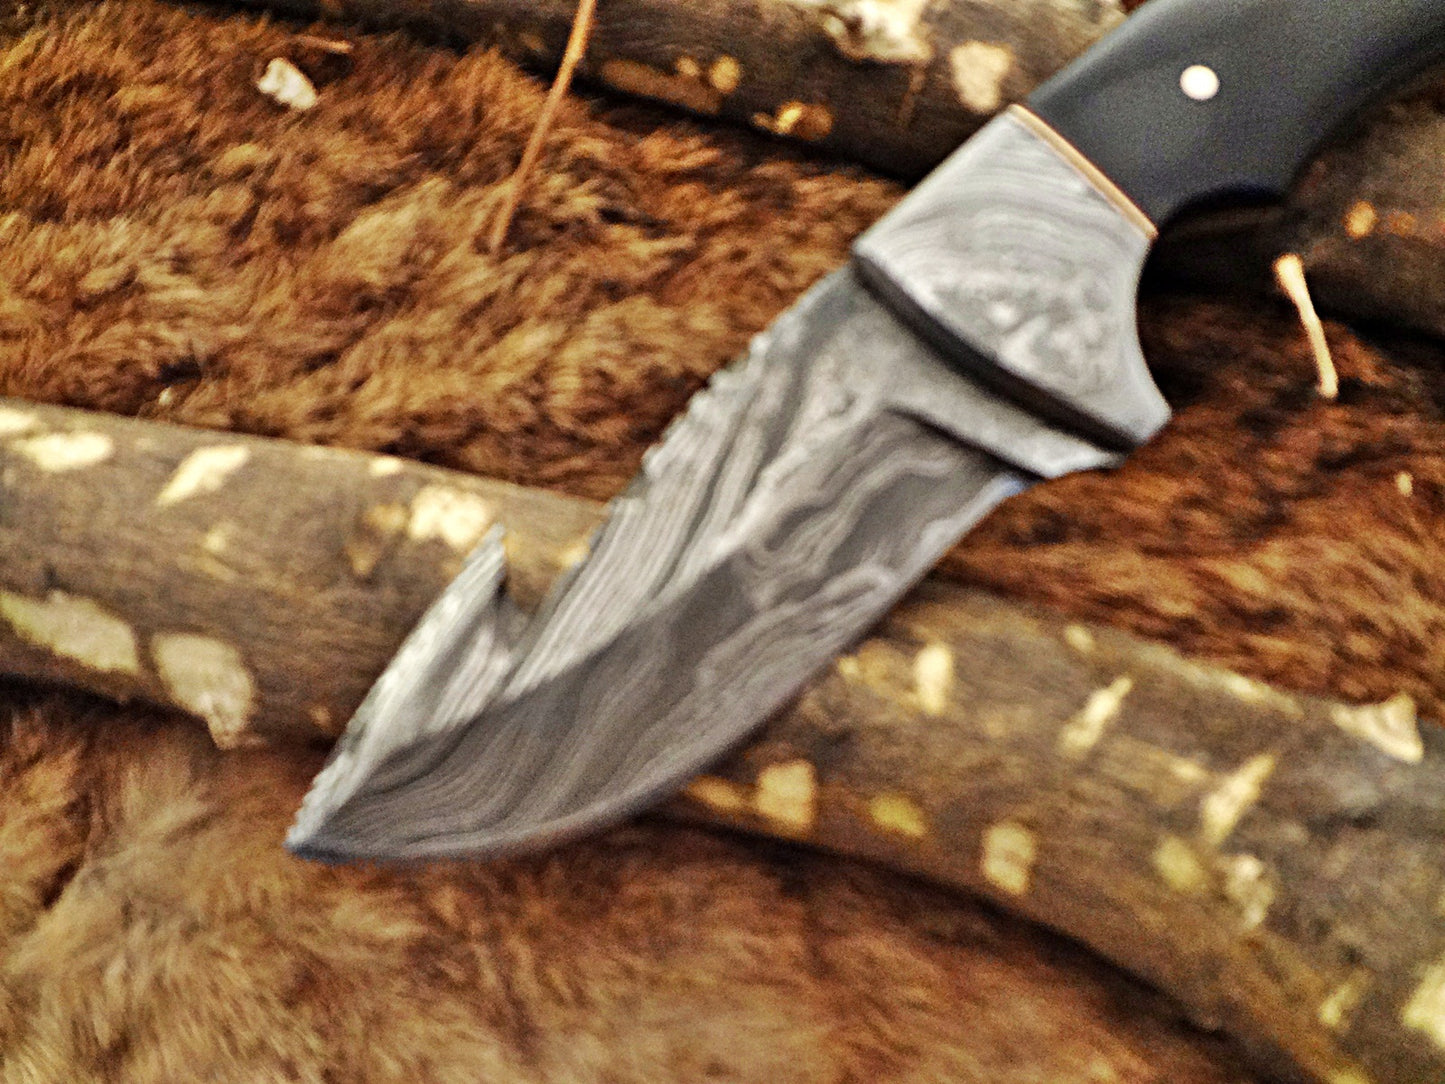 8" Long skinning knife, 4" full tang gut hook blade, hand forged Damascus steel, available in 3 scales, includes Cow Leather sheath